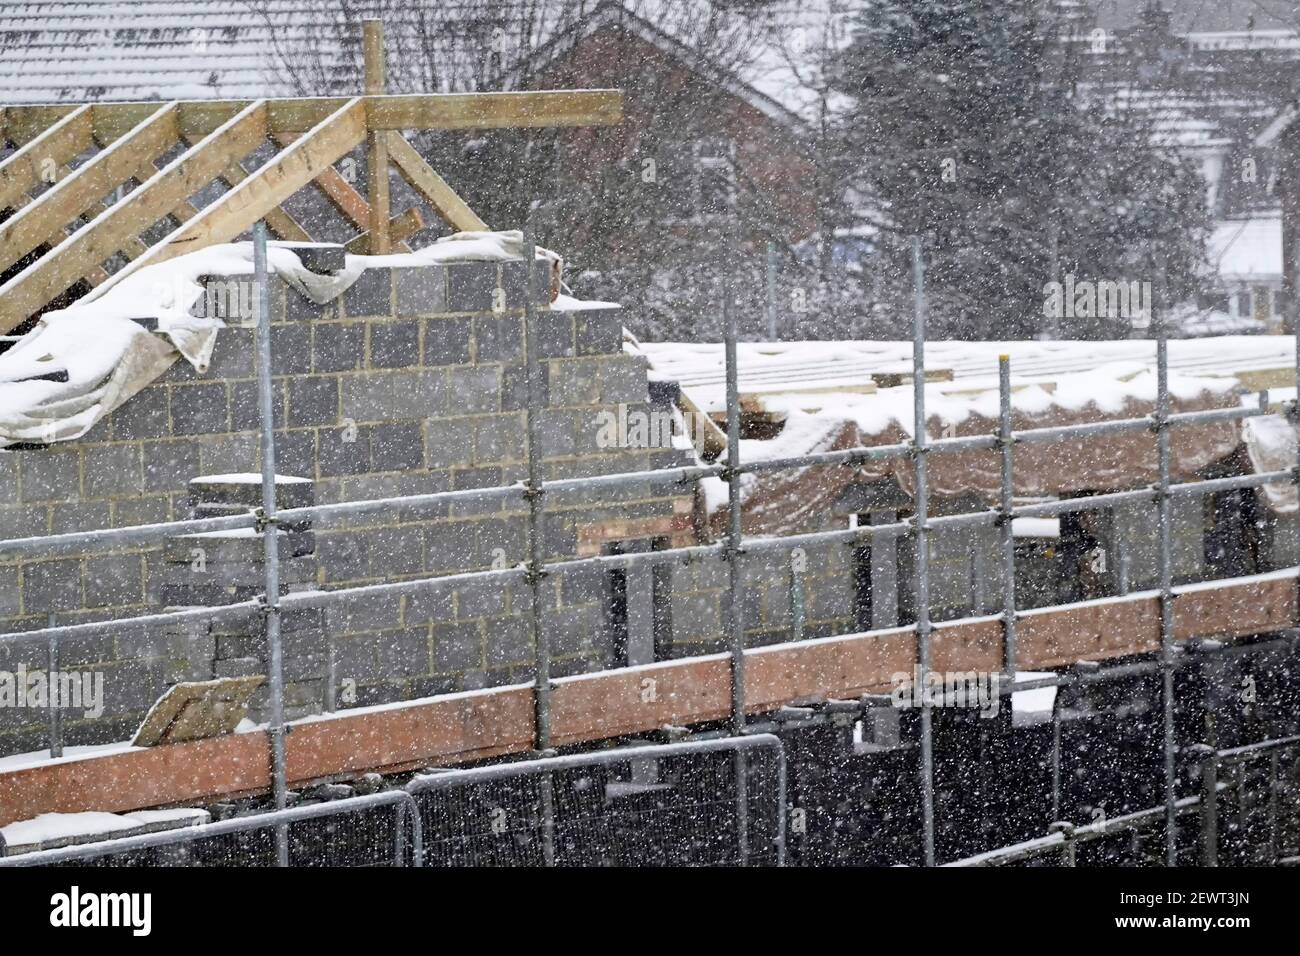 Work on building construction site stops ice on scaffolding workplace unsafe in inclement icy winter snow fall weather causing disruption England UK Stock Photo